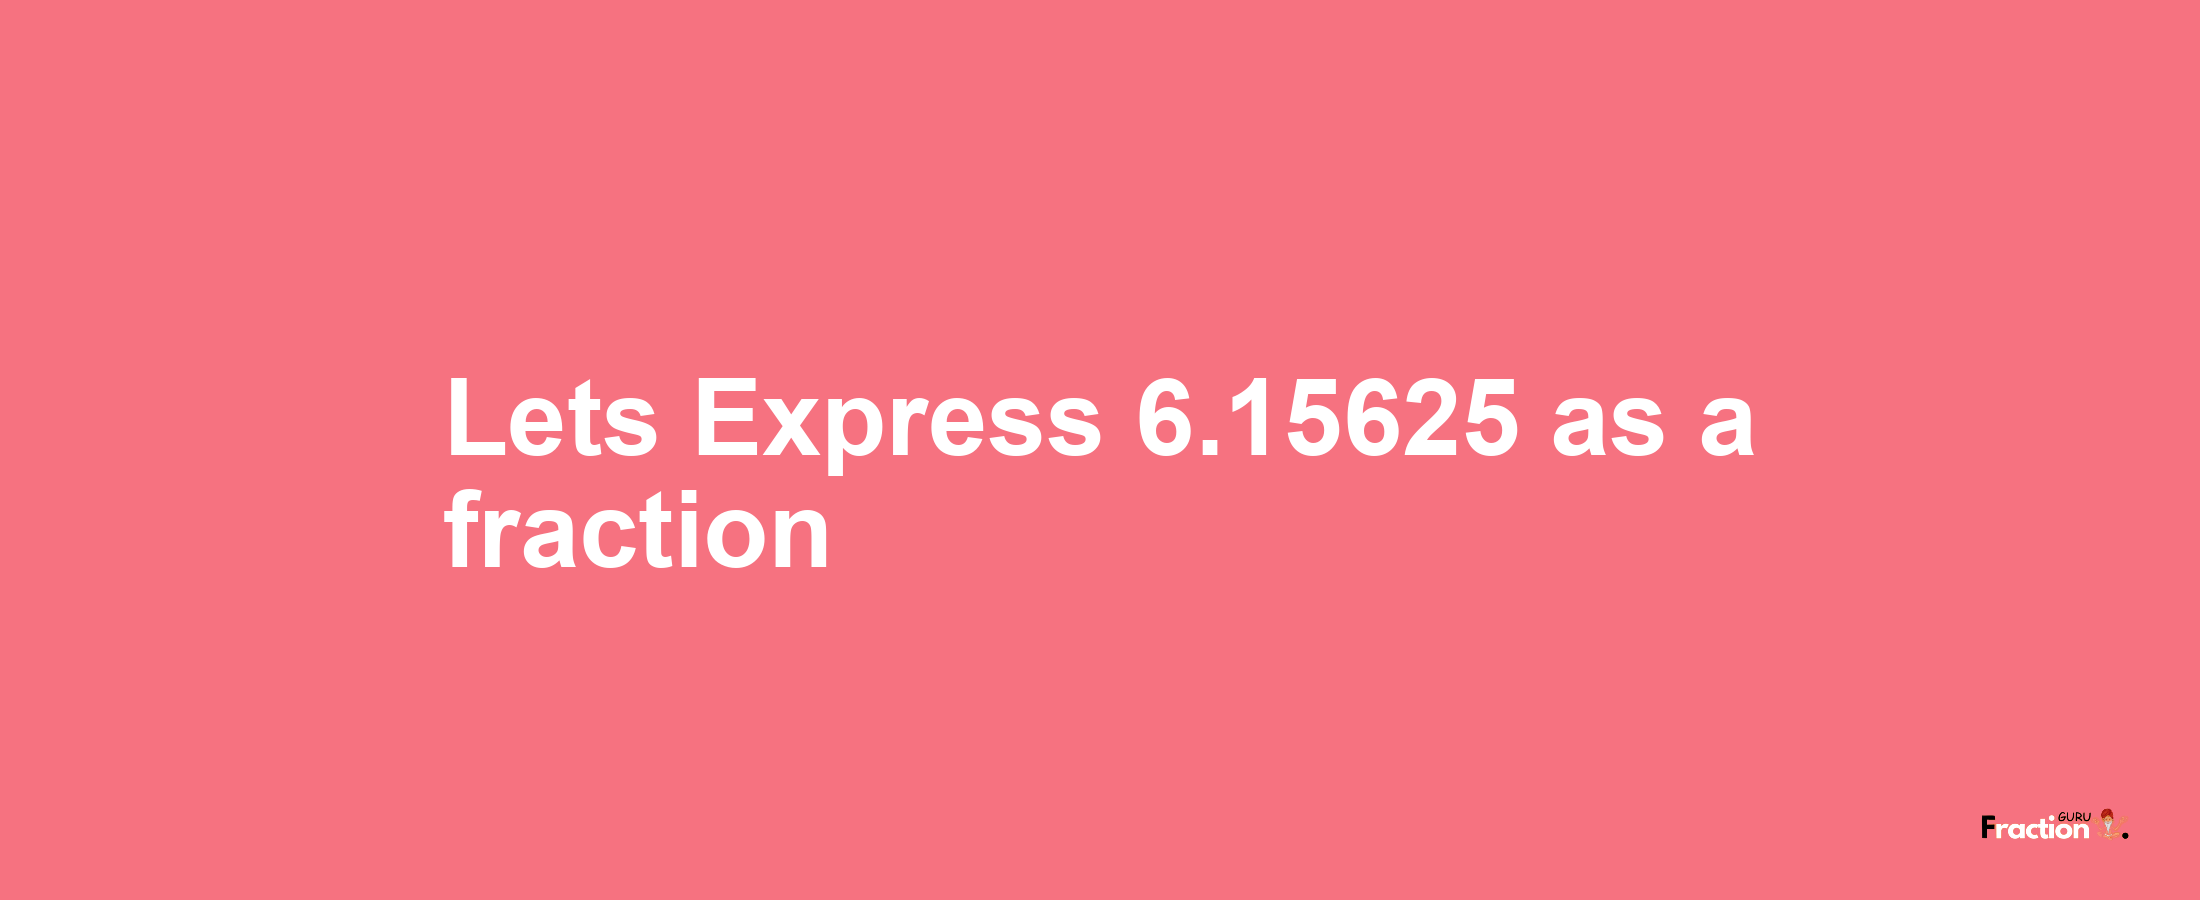 Lets Express 6.15625 as afraction